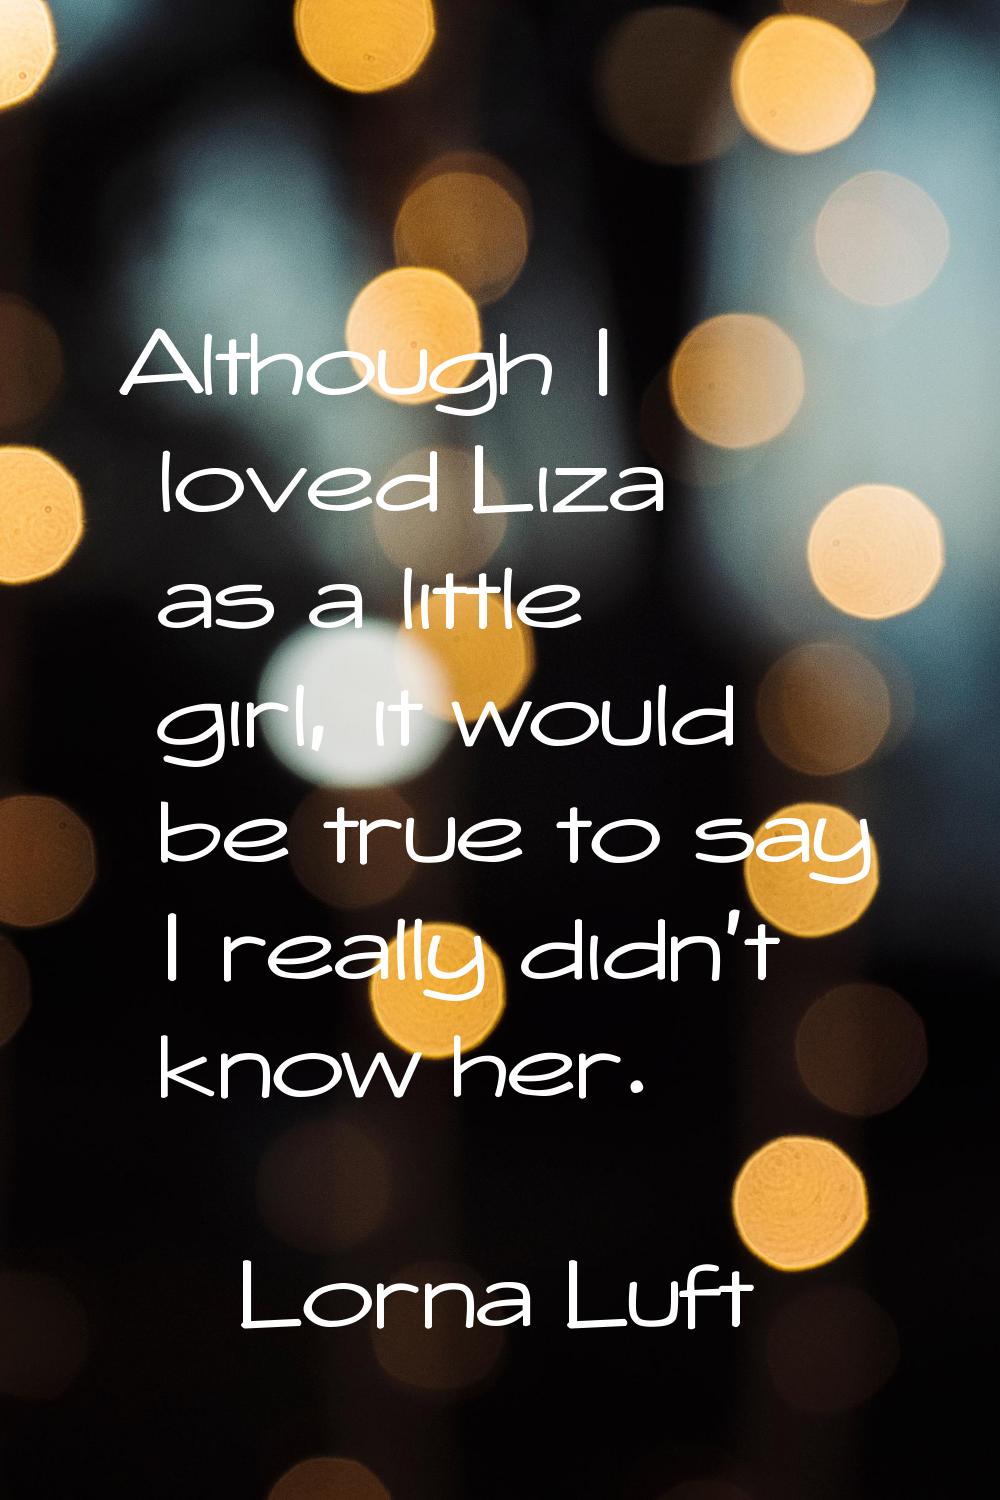 Although I loved Liza as a little girl, it would be true to say I really didn't know her.